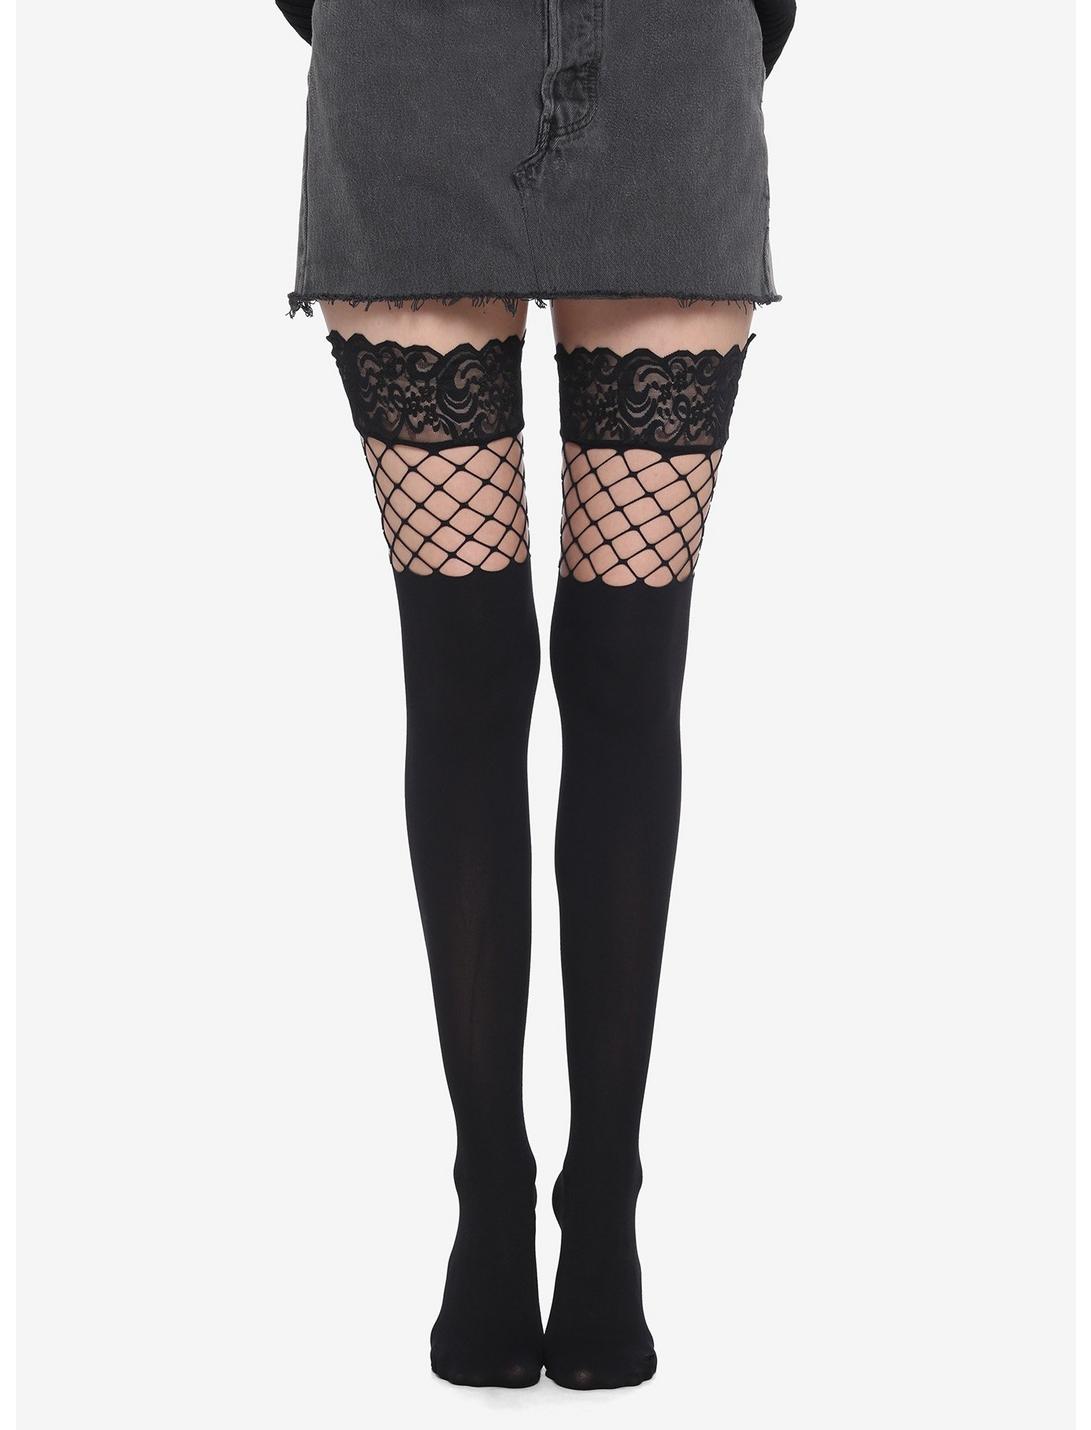 Black Lace Fishnet Thigh Highs